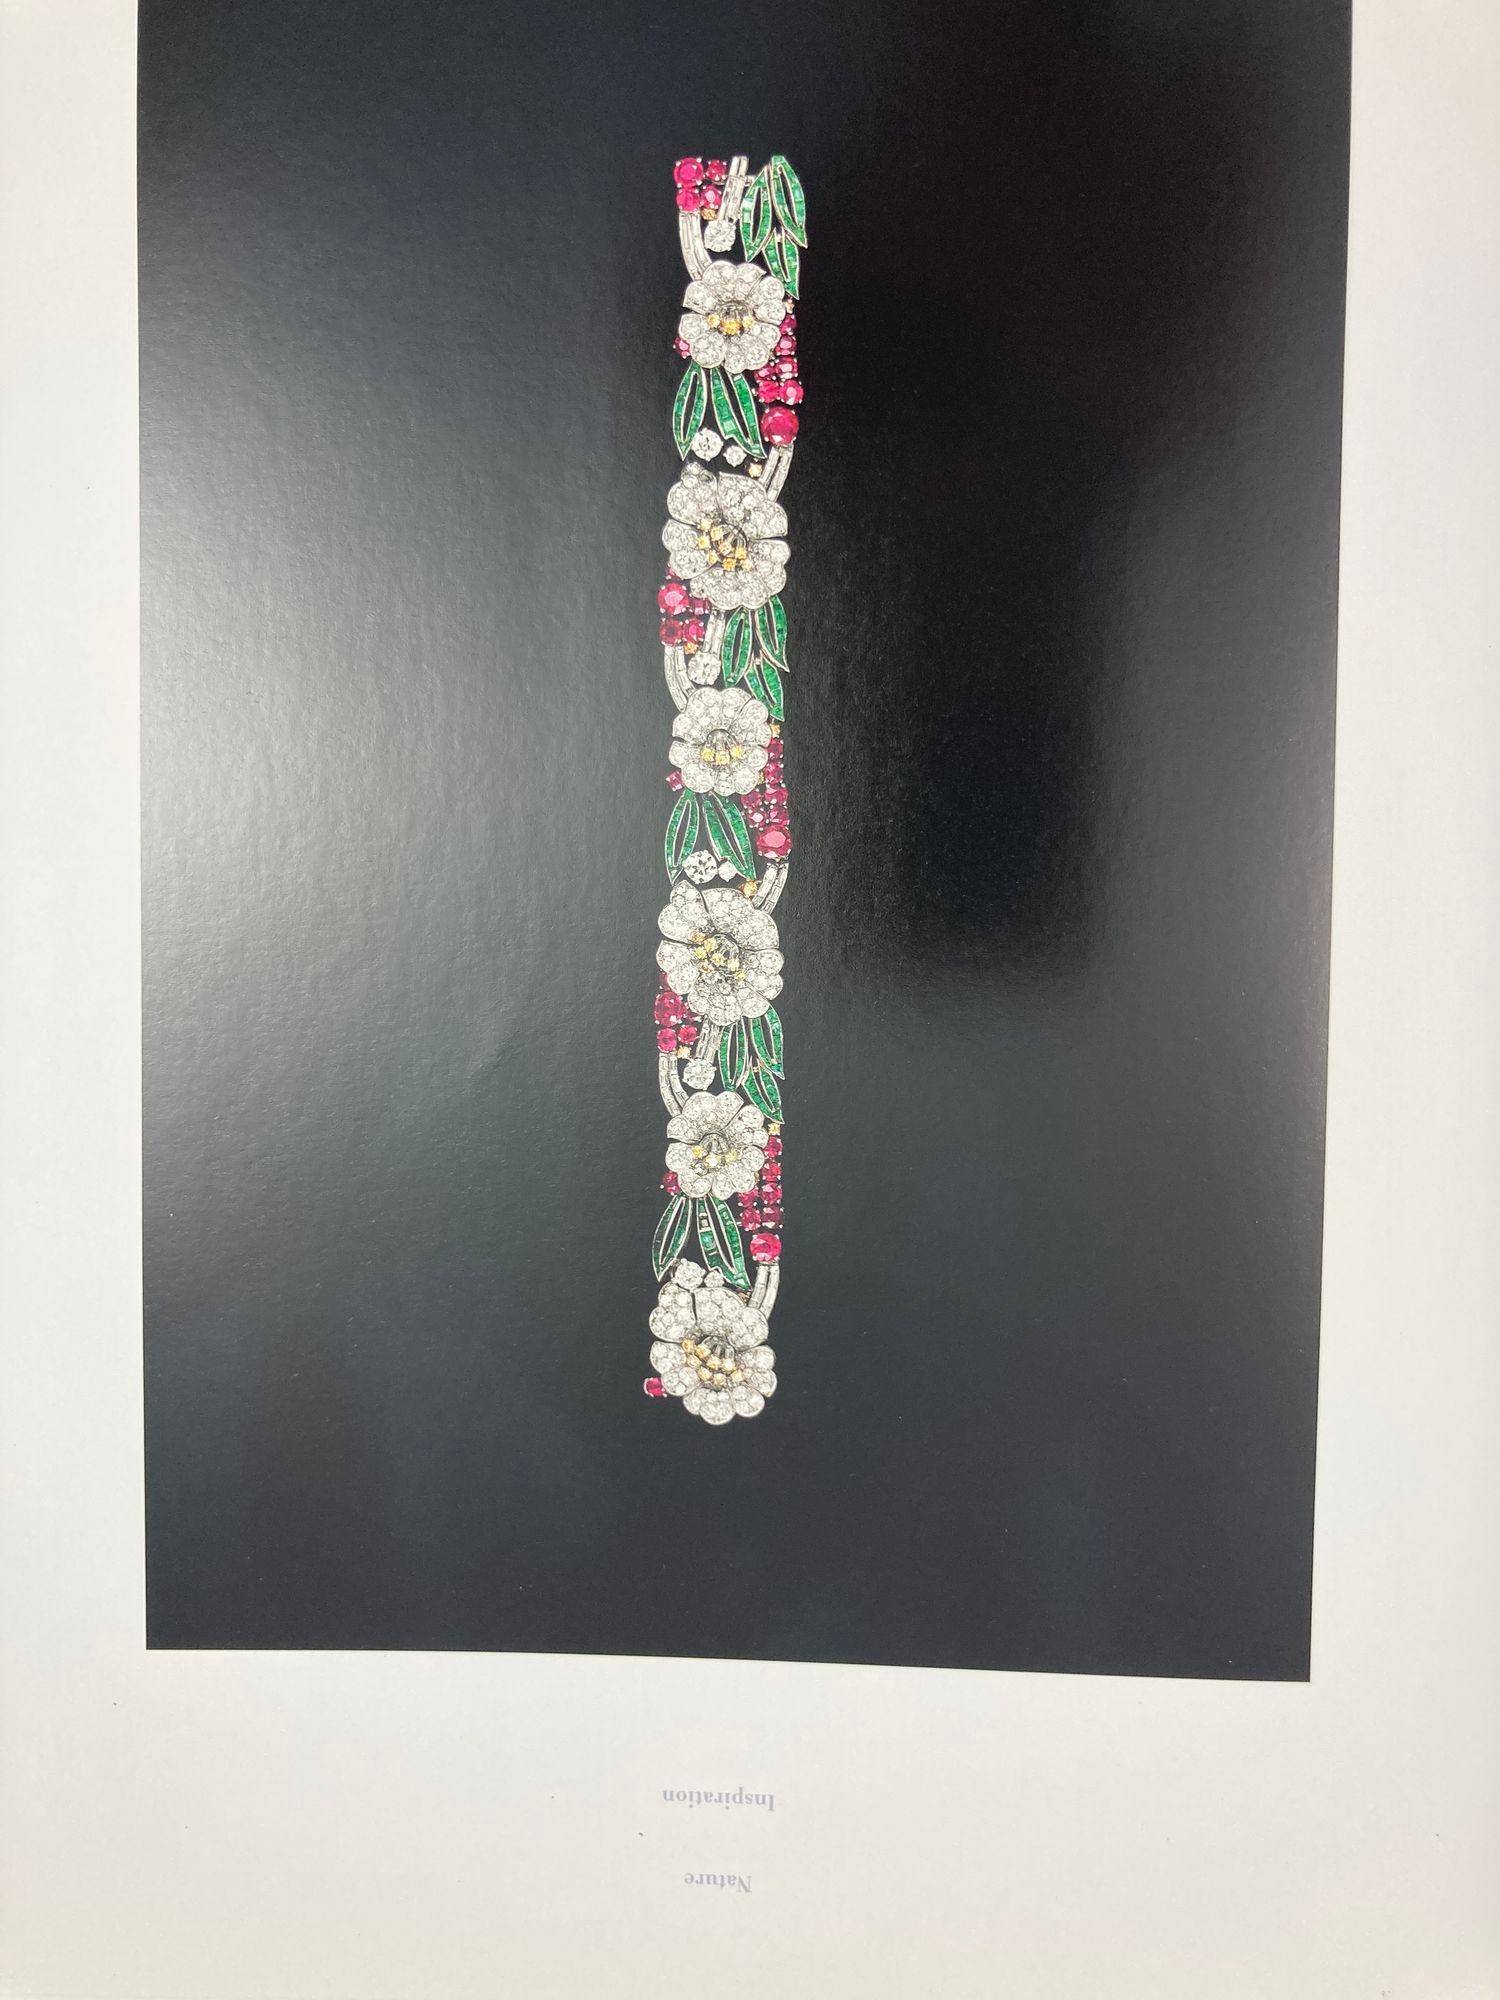 Van Cleef & Arpels: Timeless Beauty Hardcover Book 2012 For Sale 1